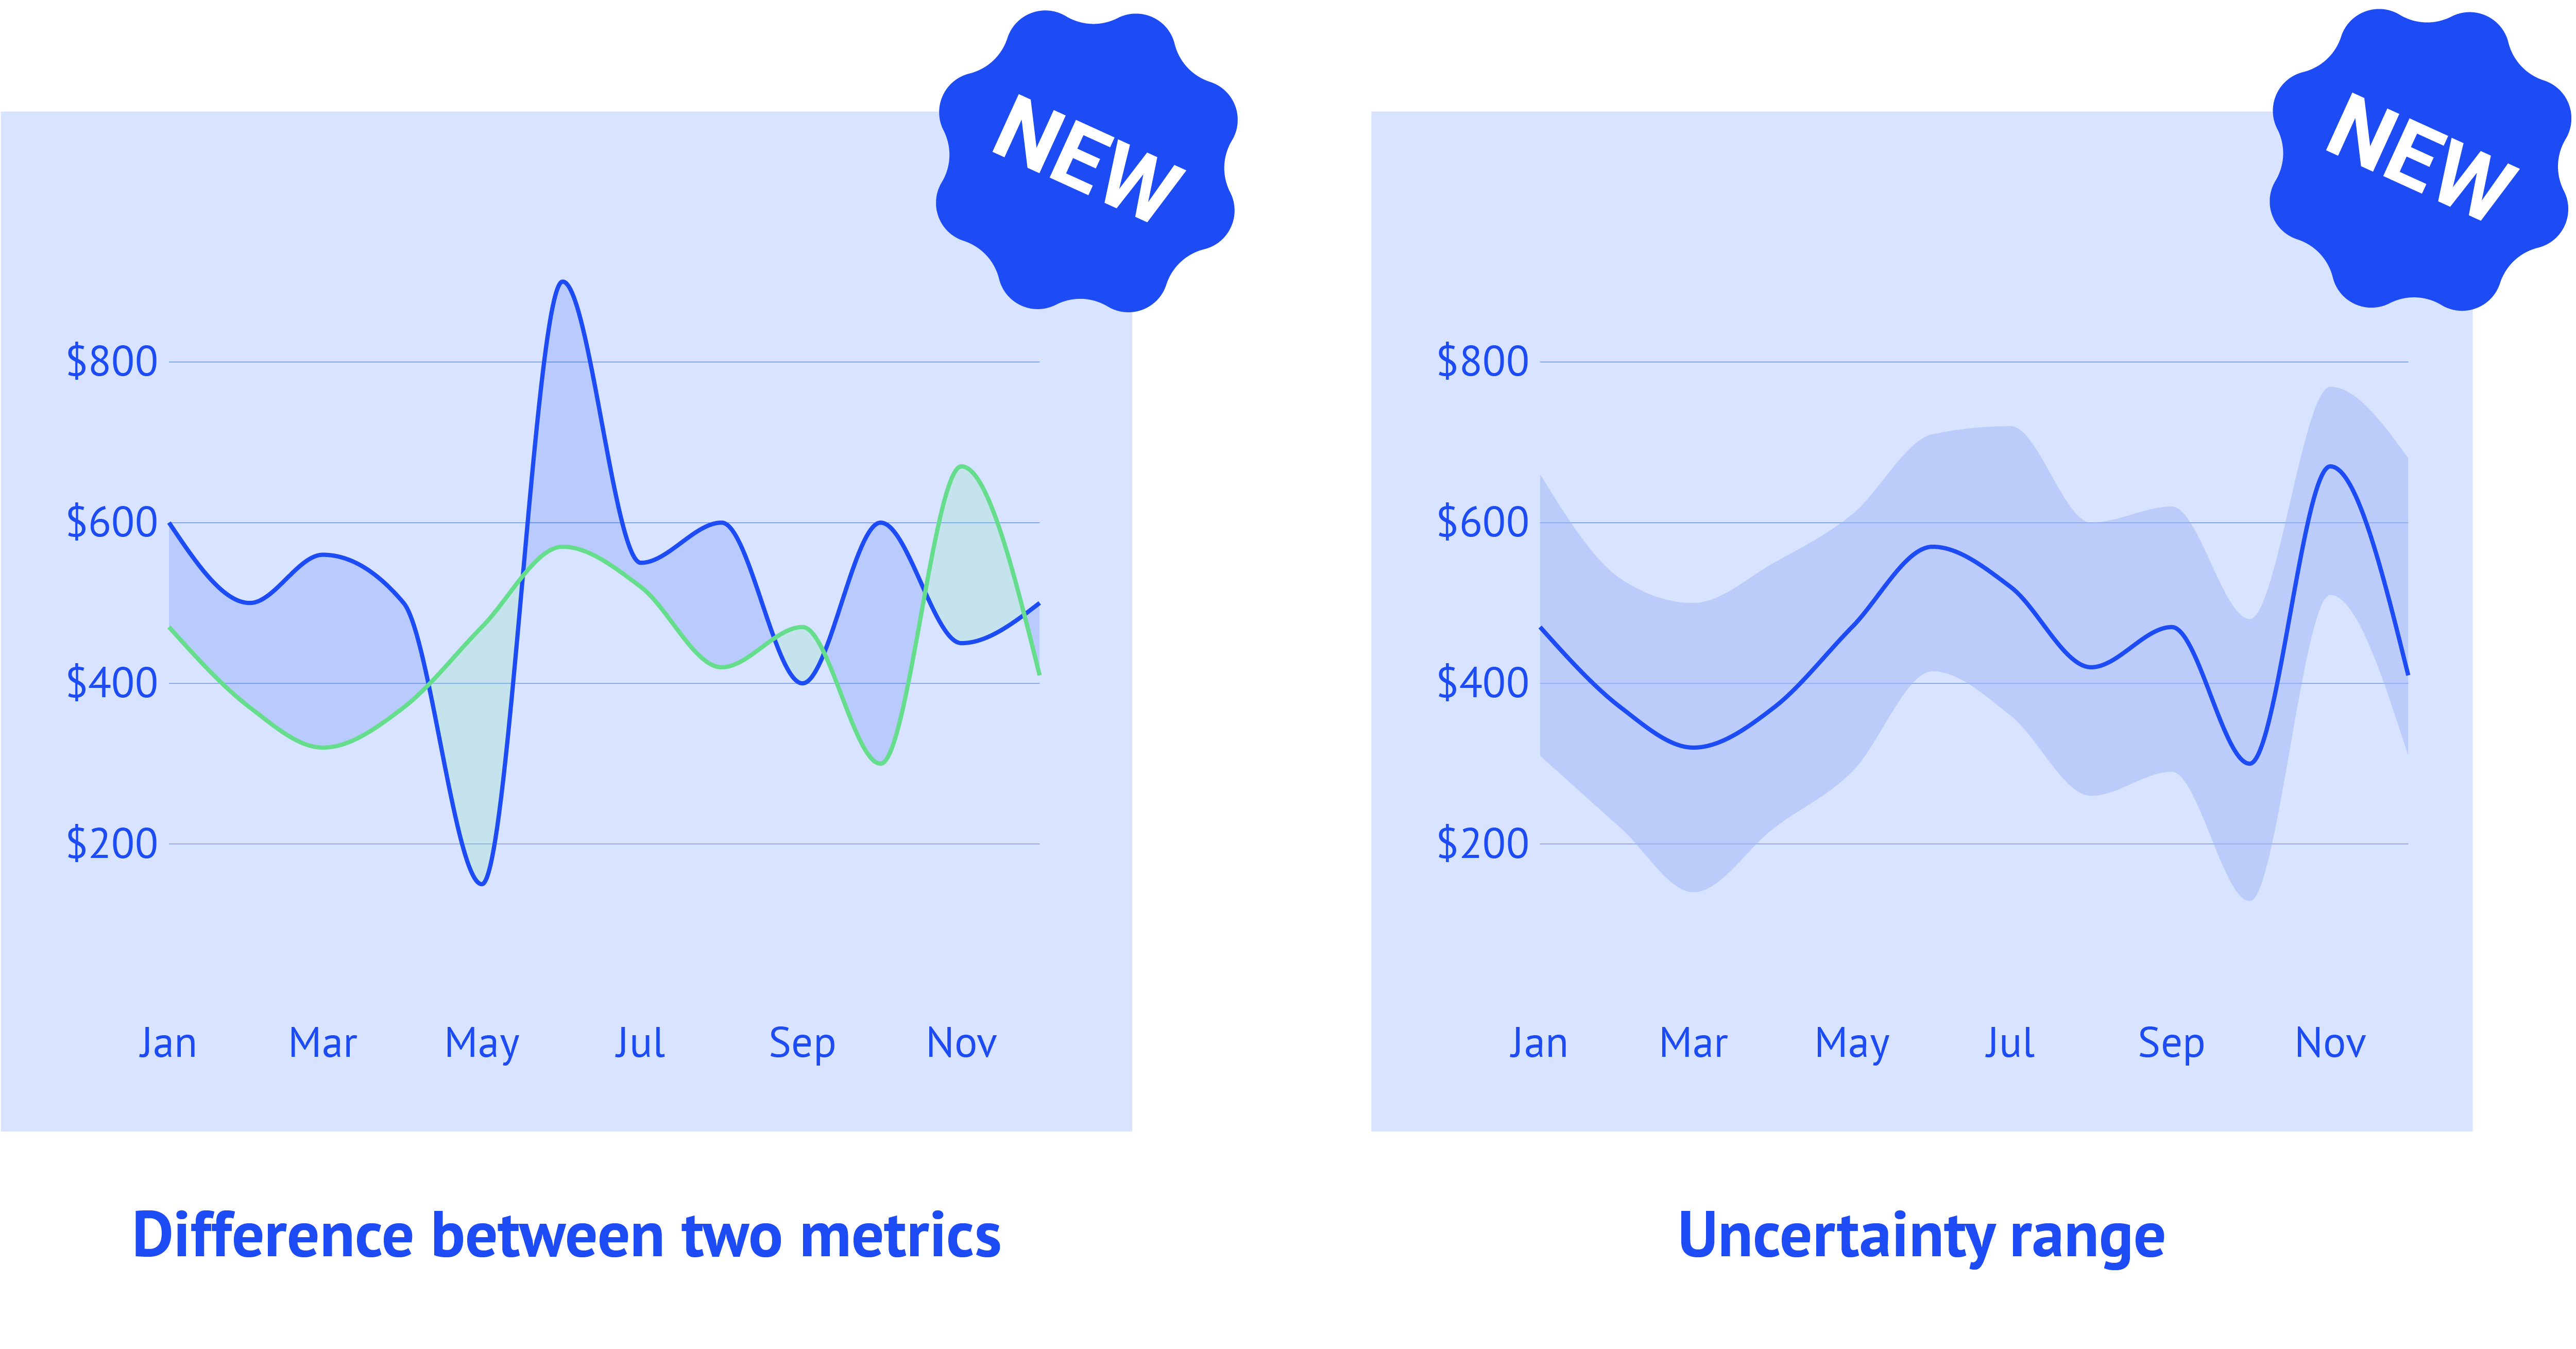 The image shows two new ways of designing a difference area chart. On the left we see a chart that shows how a difference between two metrics can be illustrated. On the right we see an example of a chart showing the uncertainty range.